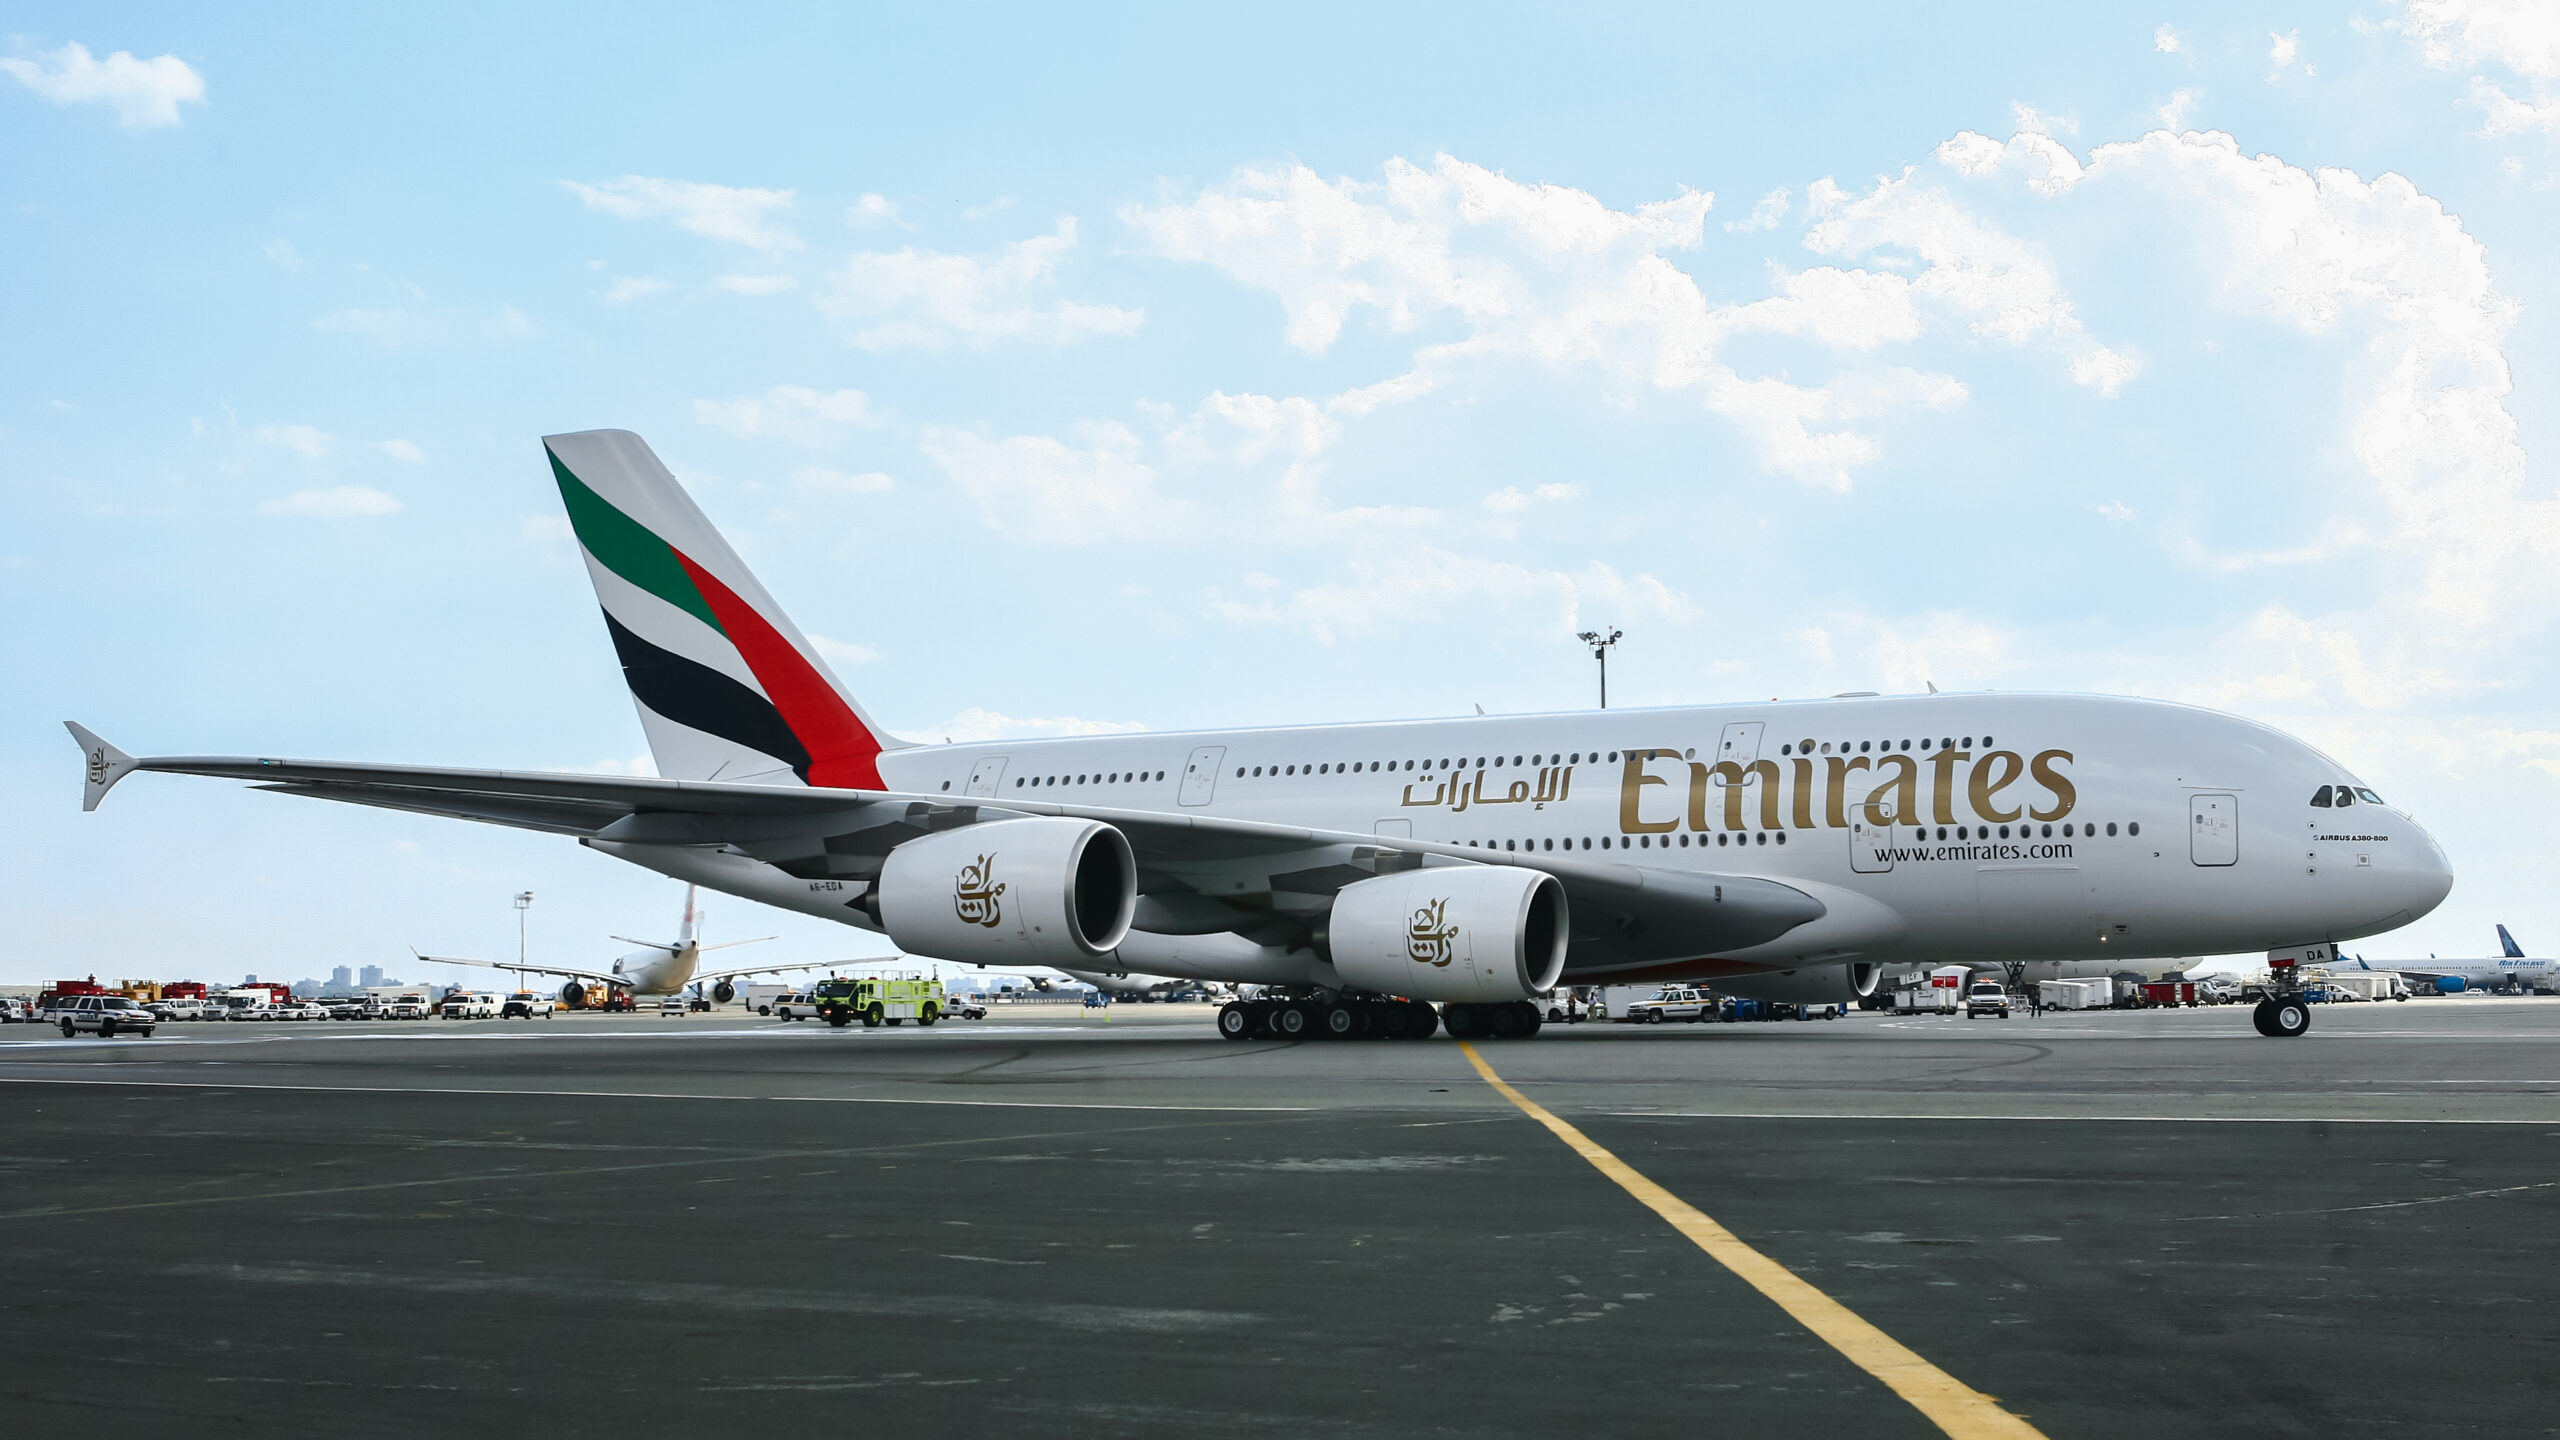 Emirates A380 recycling, Sustainable aviation, Upcycling projects, Artistic creations, 2560x1440 HD Desktop